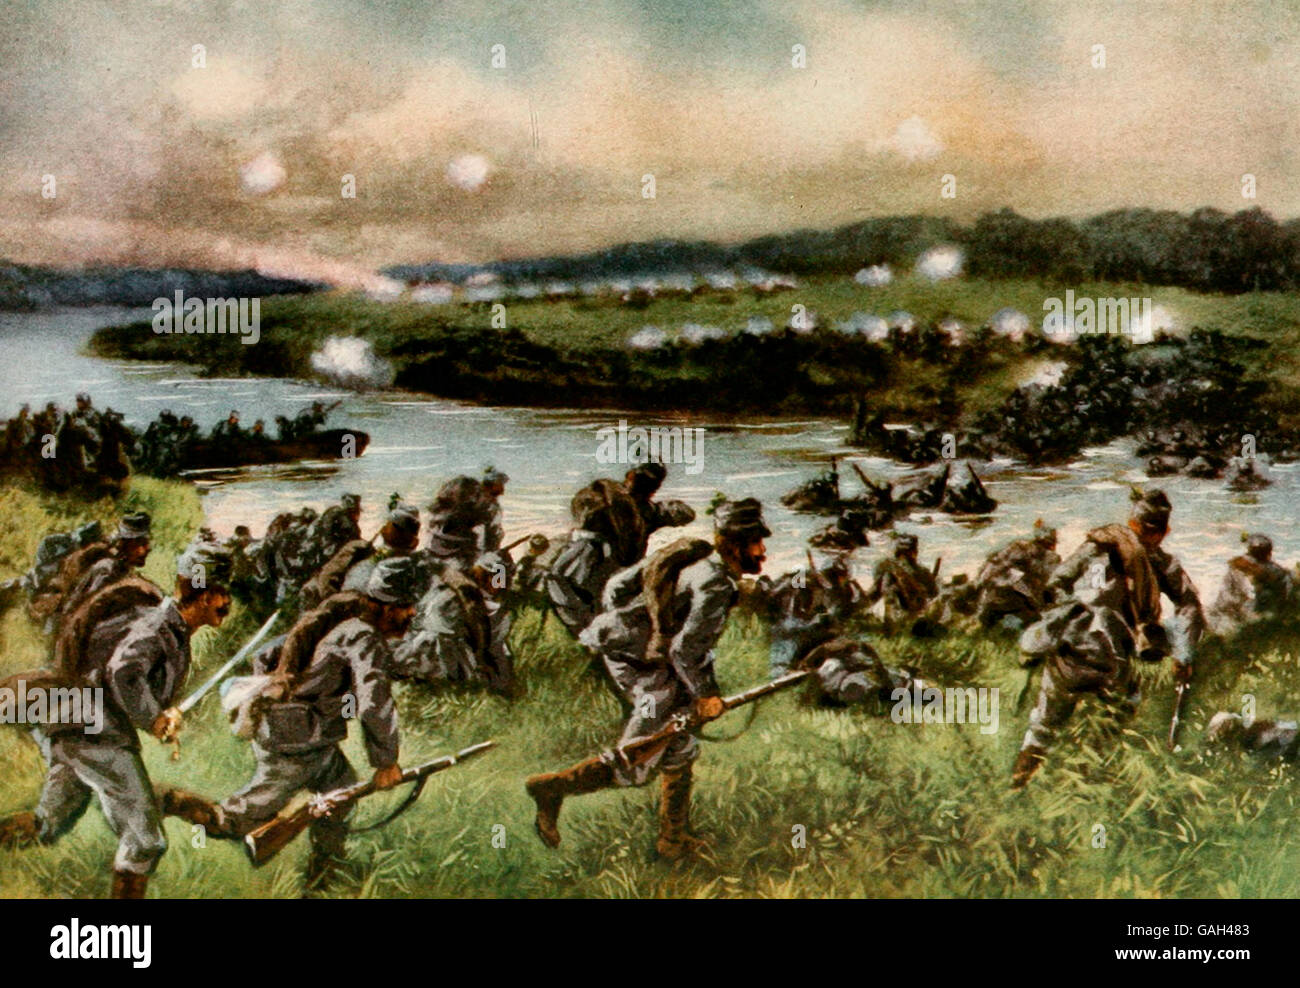 Austrian troops fording a river as the Russians withdraw during World War I Stock Photo